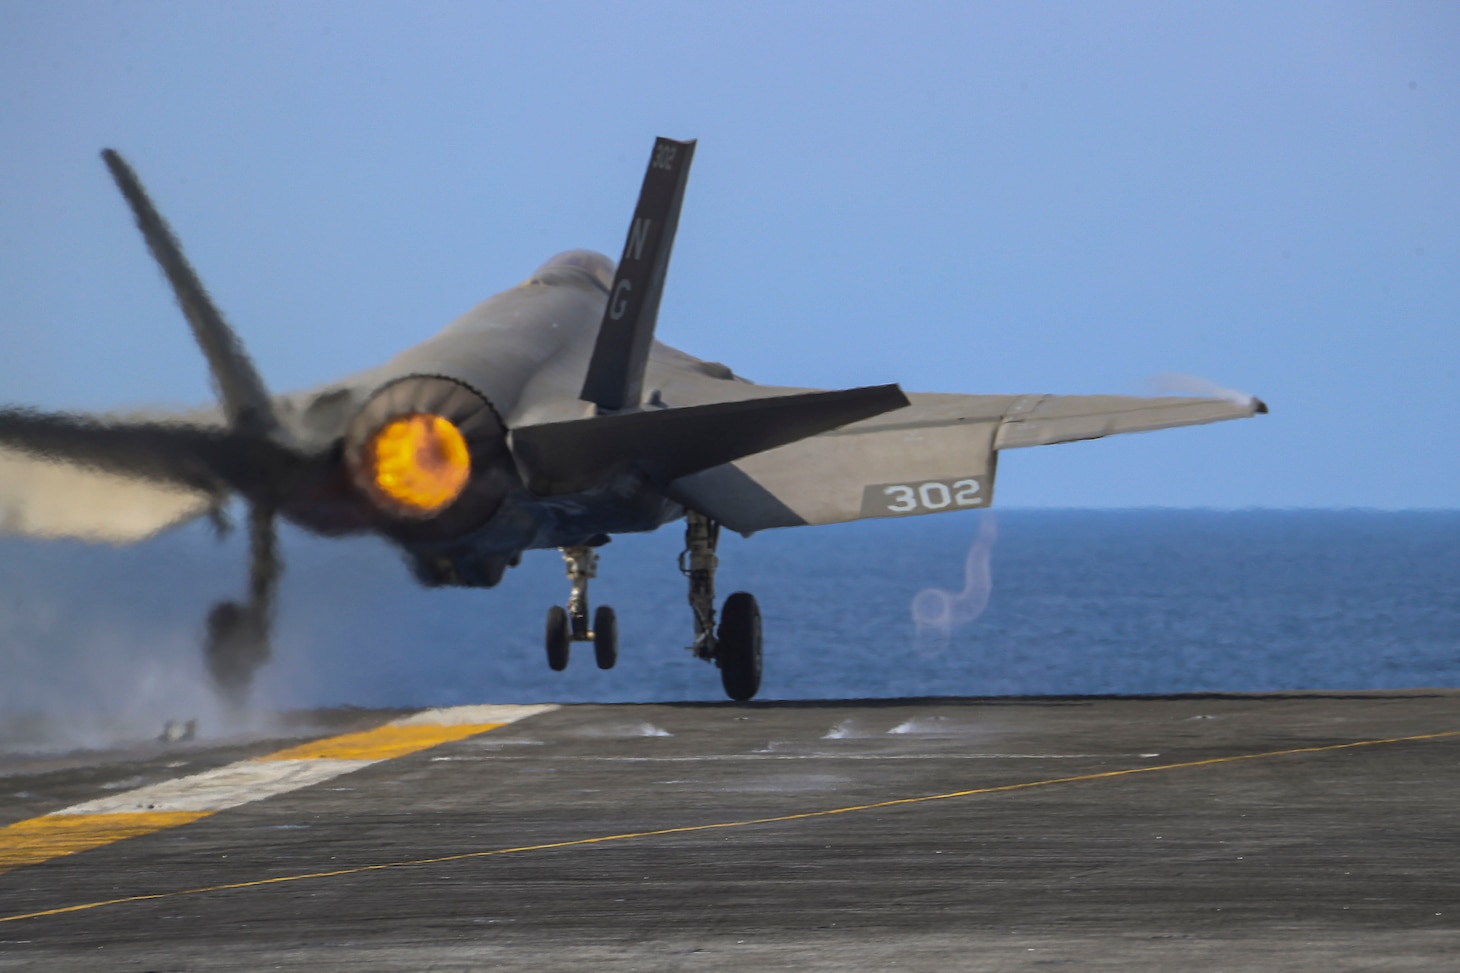 PHILIPPINE SEA (March 15, 2022) An F-35C Lightning II, assigned to the "Black Knights" of Marine Fighter Attack Squadron (VMFA) 314, launches from the flight deck of the Nimitz-class aircraft carrier USS Abraham Lincoln (CVN 72). Abraham Lincoln Strike Group is on a scheduled deployment in the U.S. 7th Fleet area of operations to enhance interoperability through alliances and partnerships while serving as a ready-response force in support of a free and open Indo-Pacific region. (U.S. Navy photo by Mass Communication Specialist 3rd Class Javier Reyes)